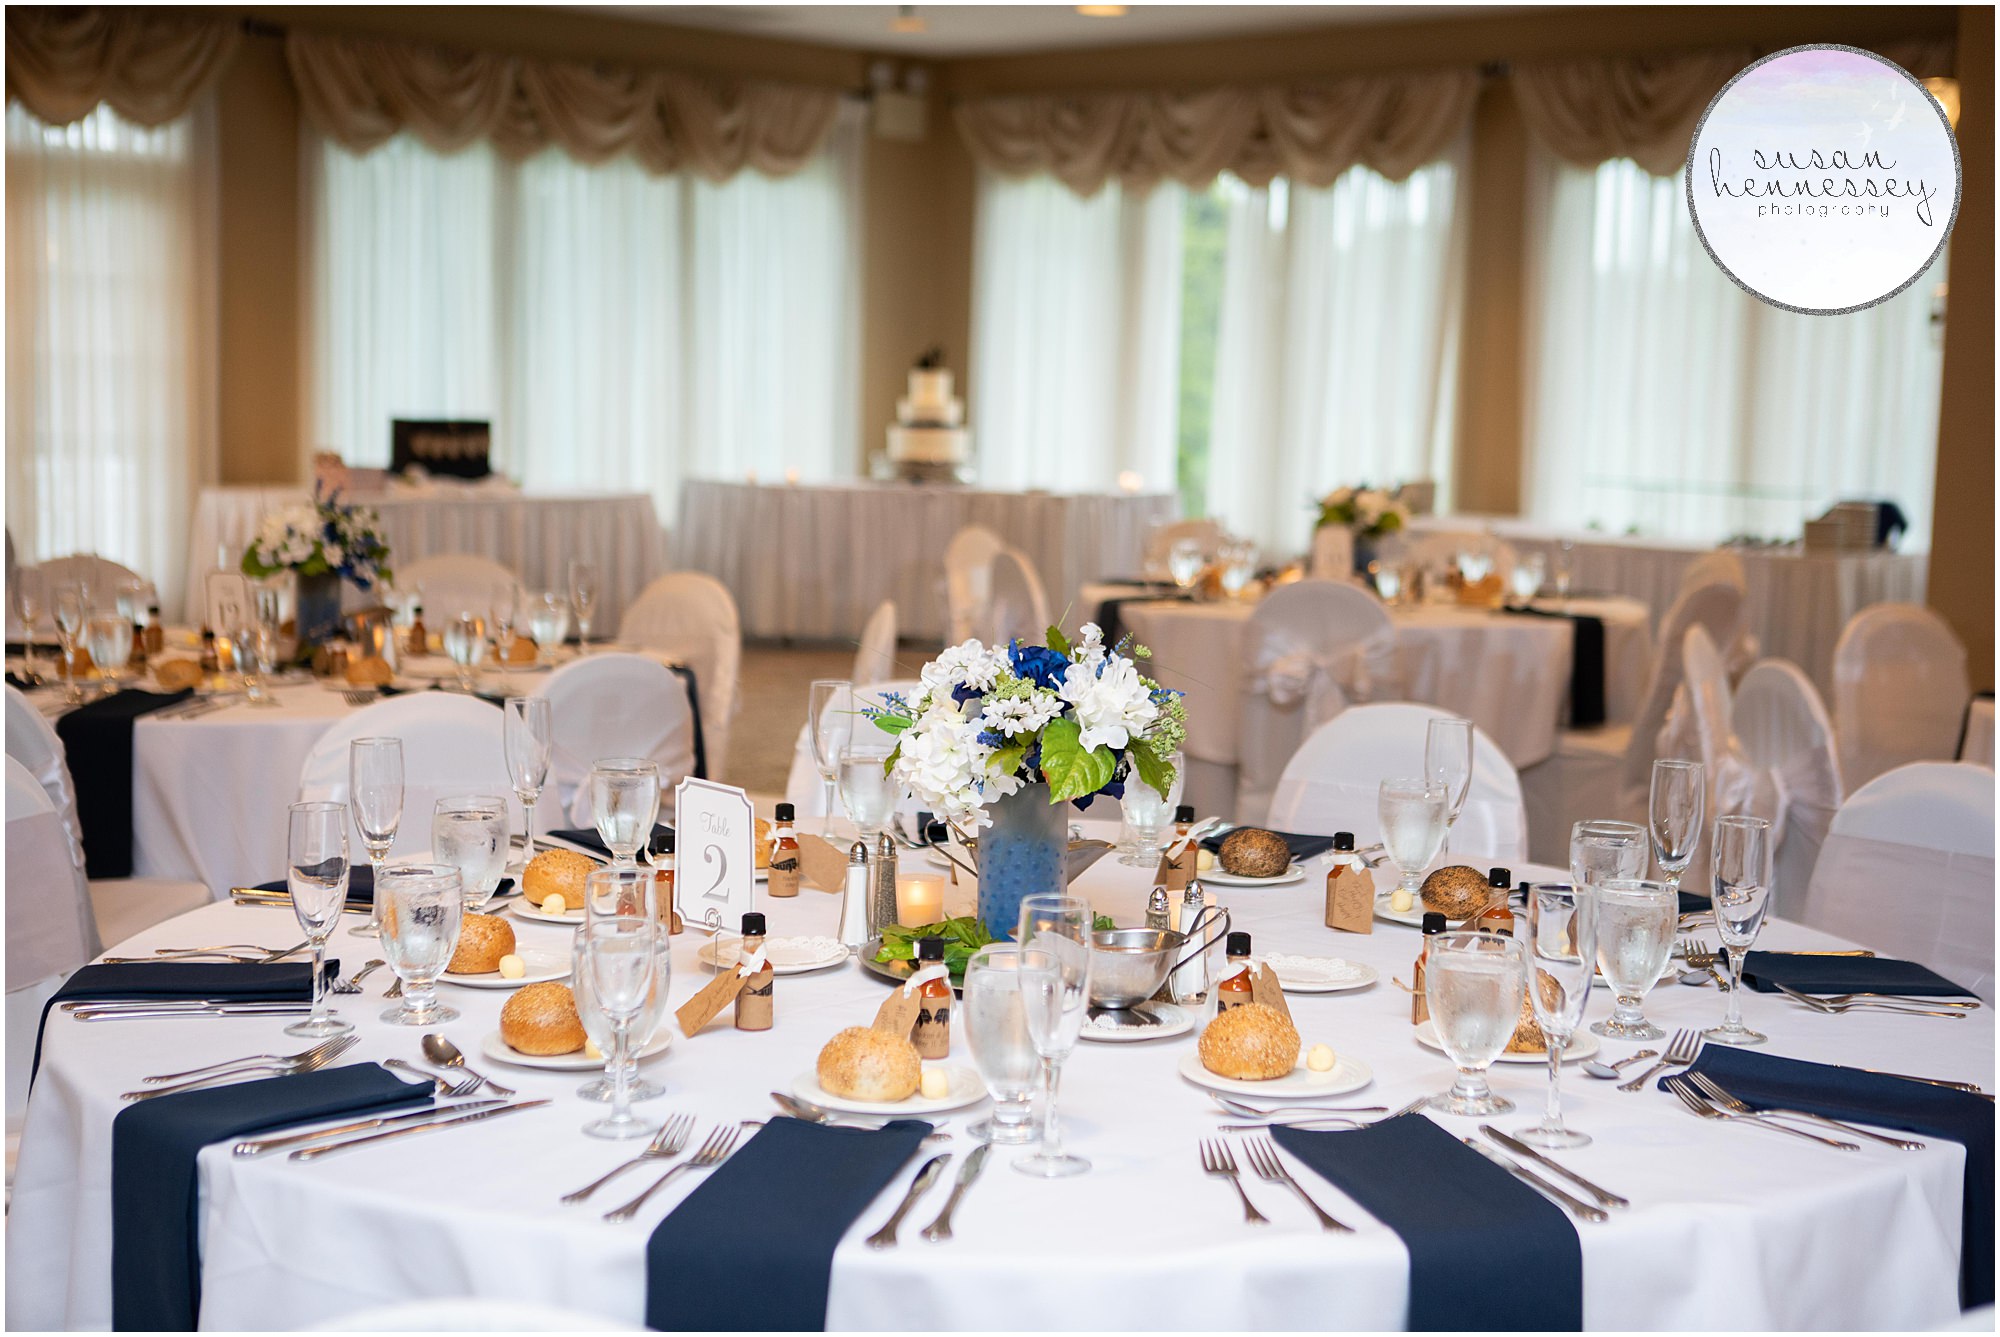 Reception details at Greate Bay Country Club